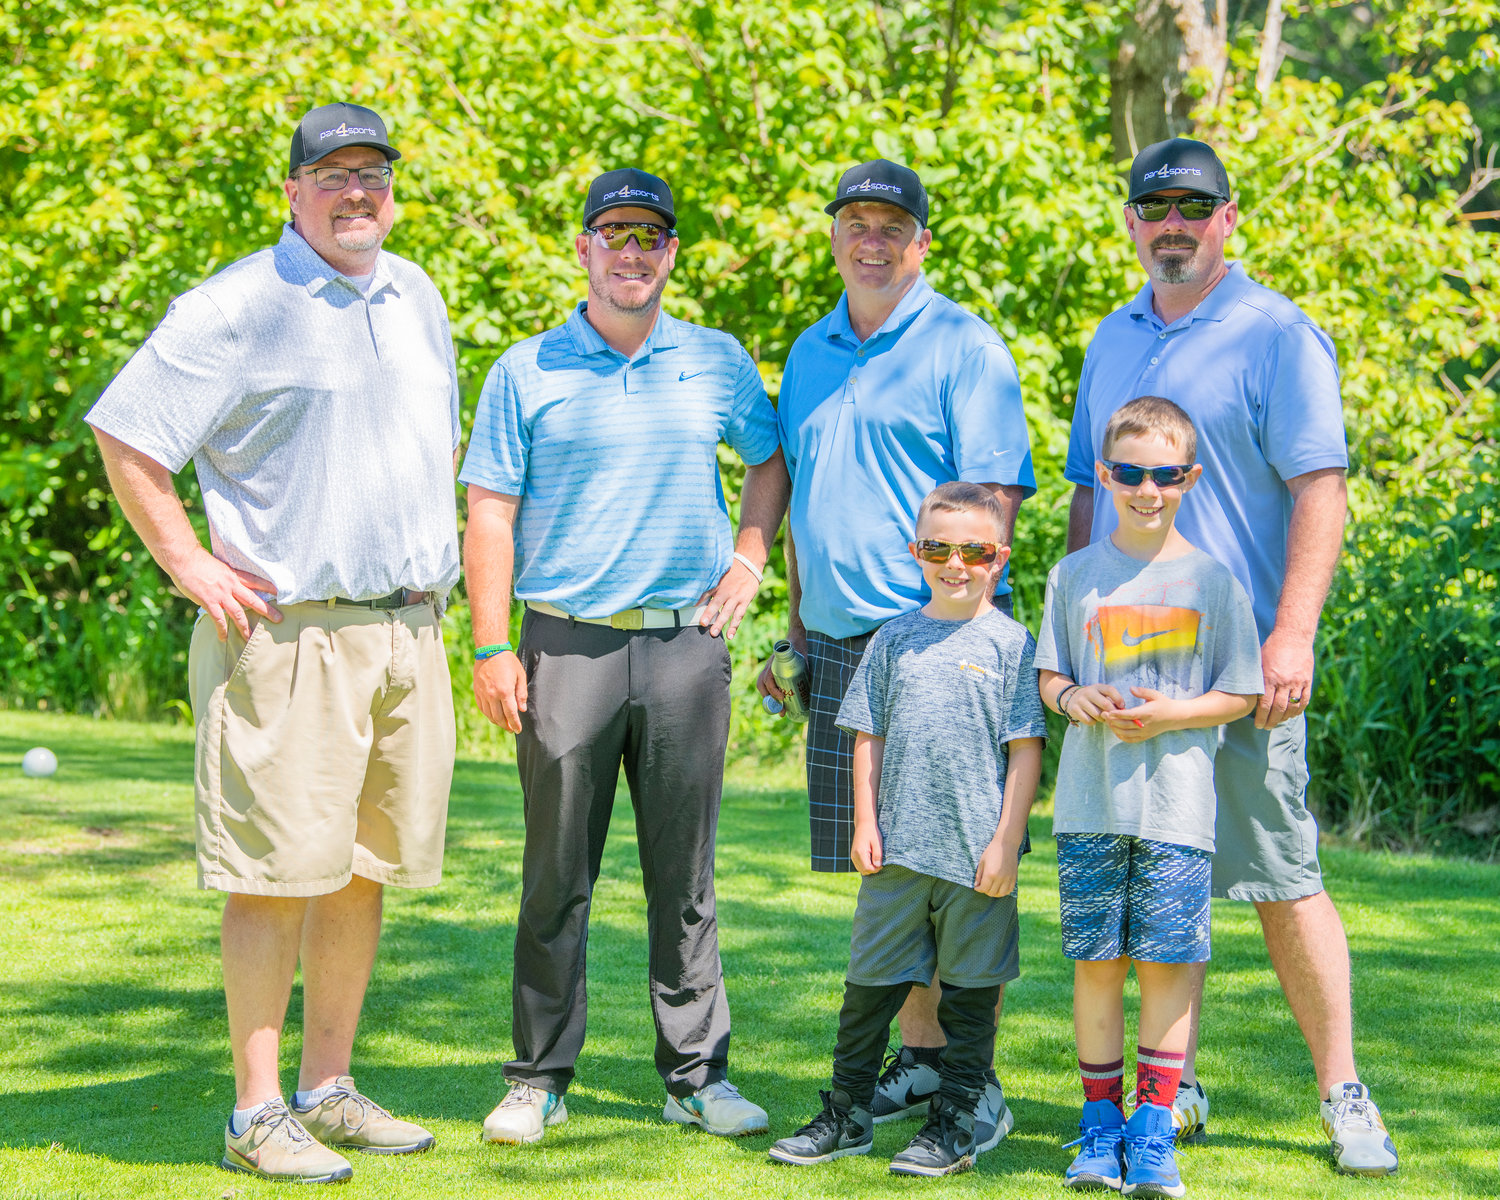 The Par4Sports team poses for a photo during a charity golf tournament at Riverside Golf Course in Chehalis on Friday.